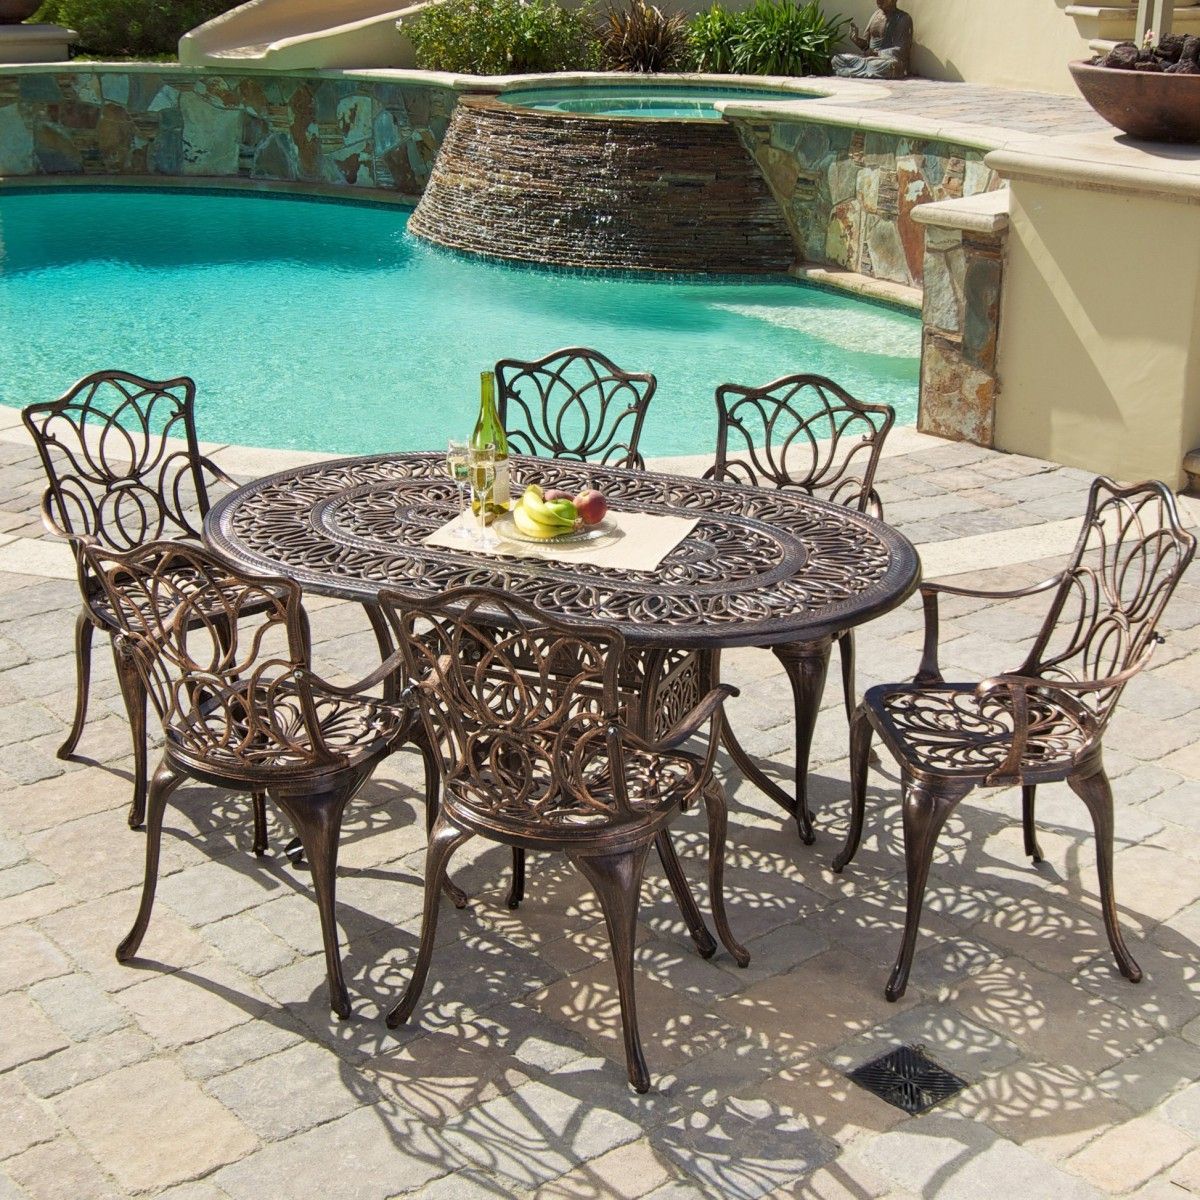 Gardena Cast Aluminum 7 Piece Outdoor Dining Set With Oval Table Intended For 7 Piece Outdoor Oval Dining Sets (View 2 of 15)